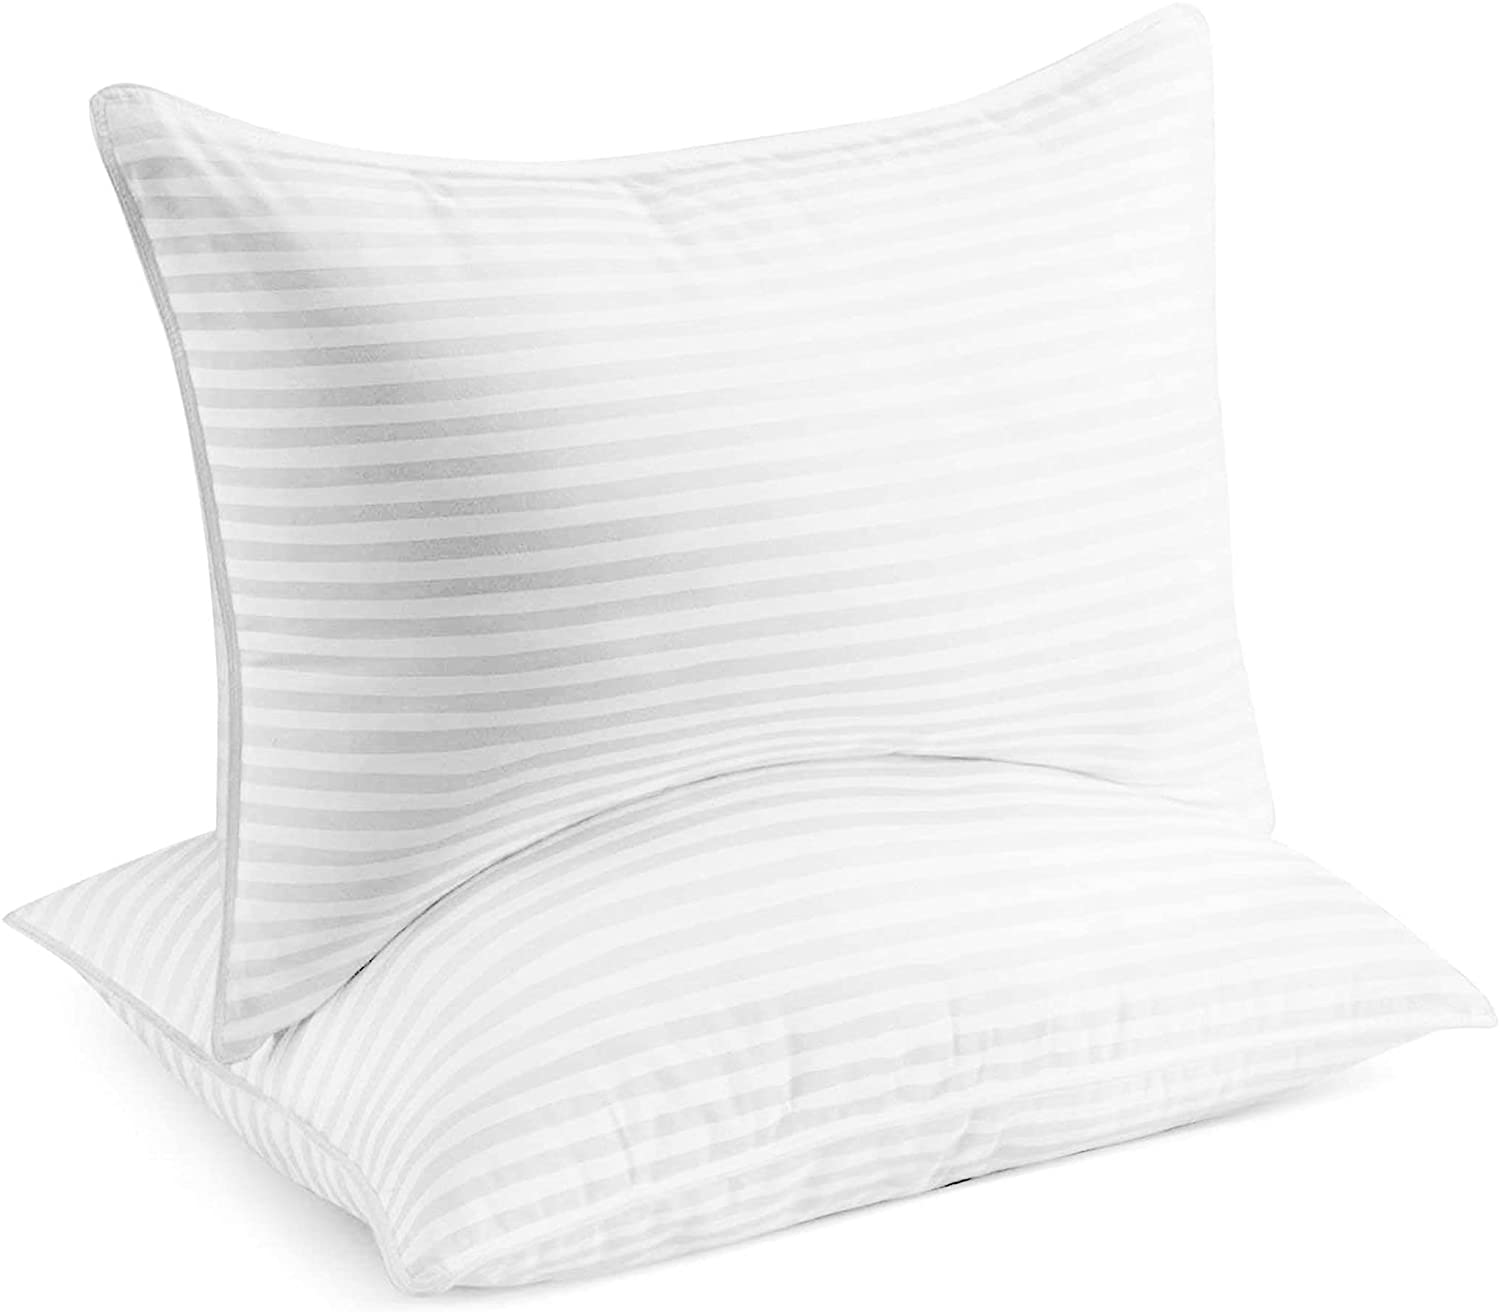 Beckham Hotel Collection Luxury Linens Down Alternative Pillows for Sleeping, Queen, 2 Pack - image 1 of 9